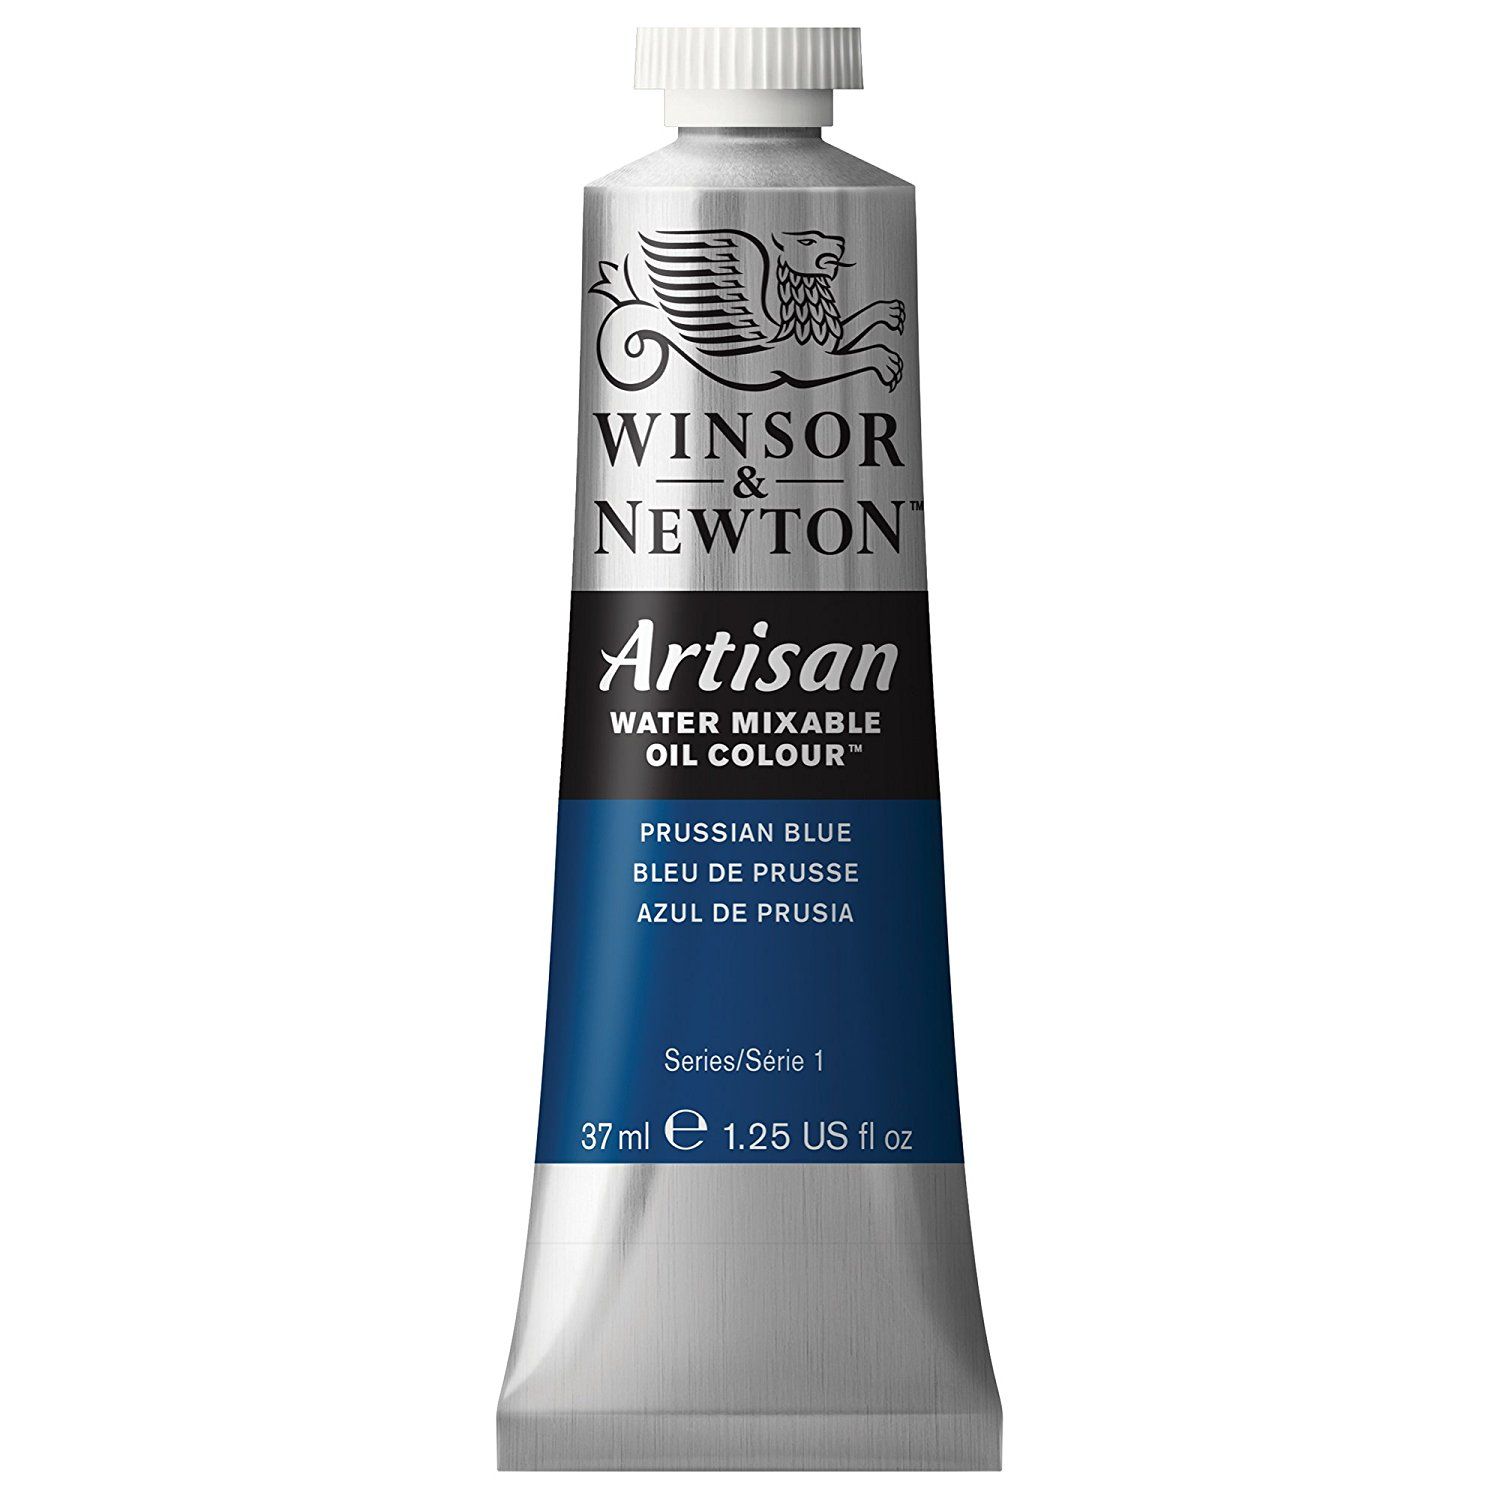 Artisan Water Mixable Oil - Prussian Blue 37ml